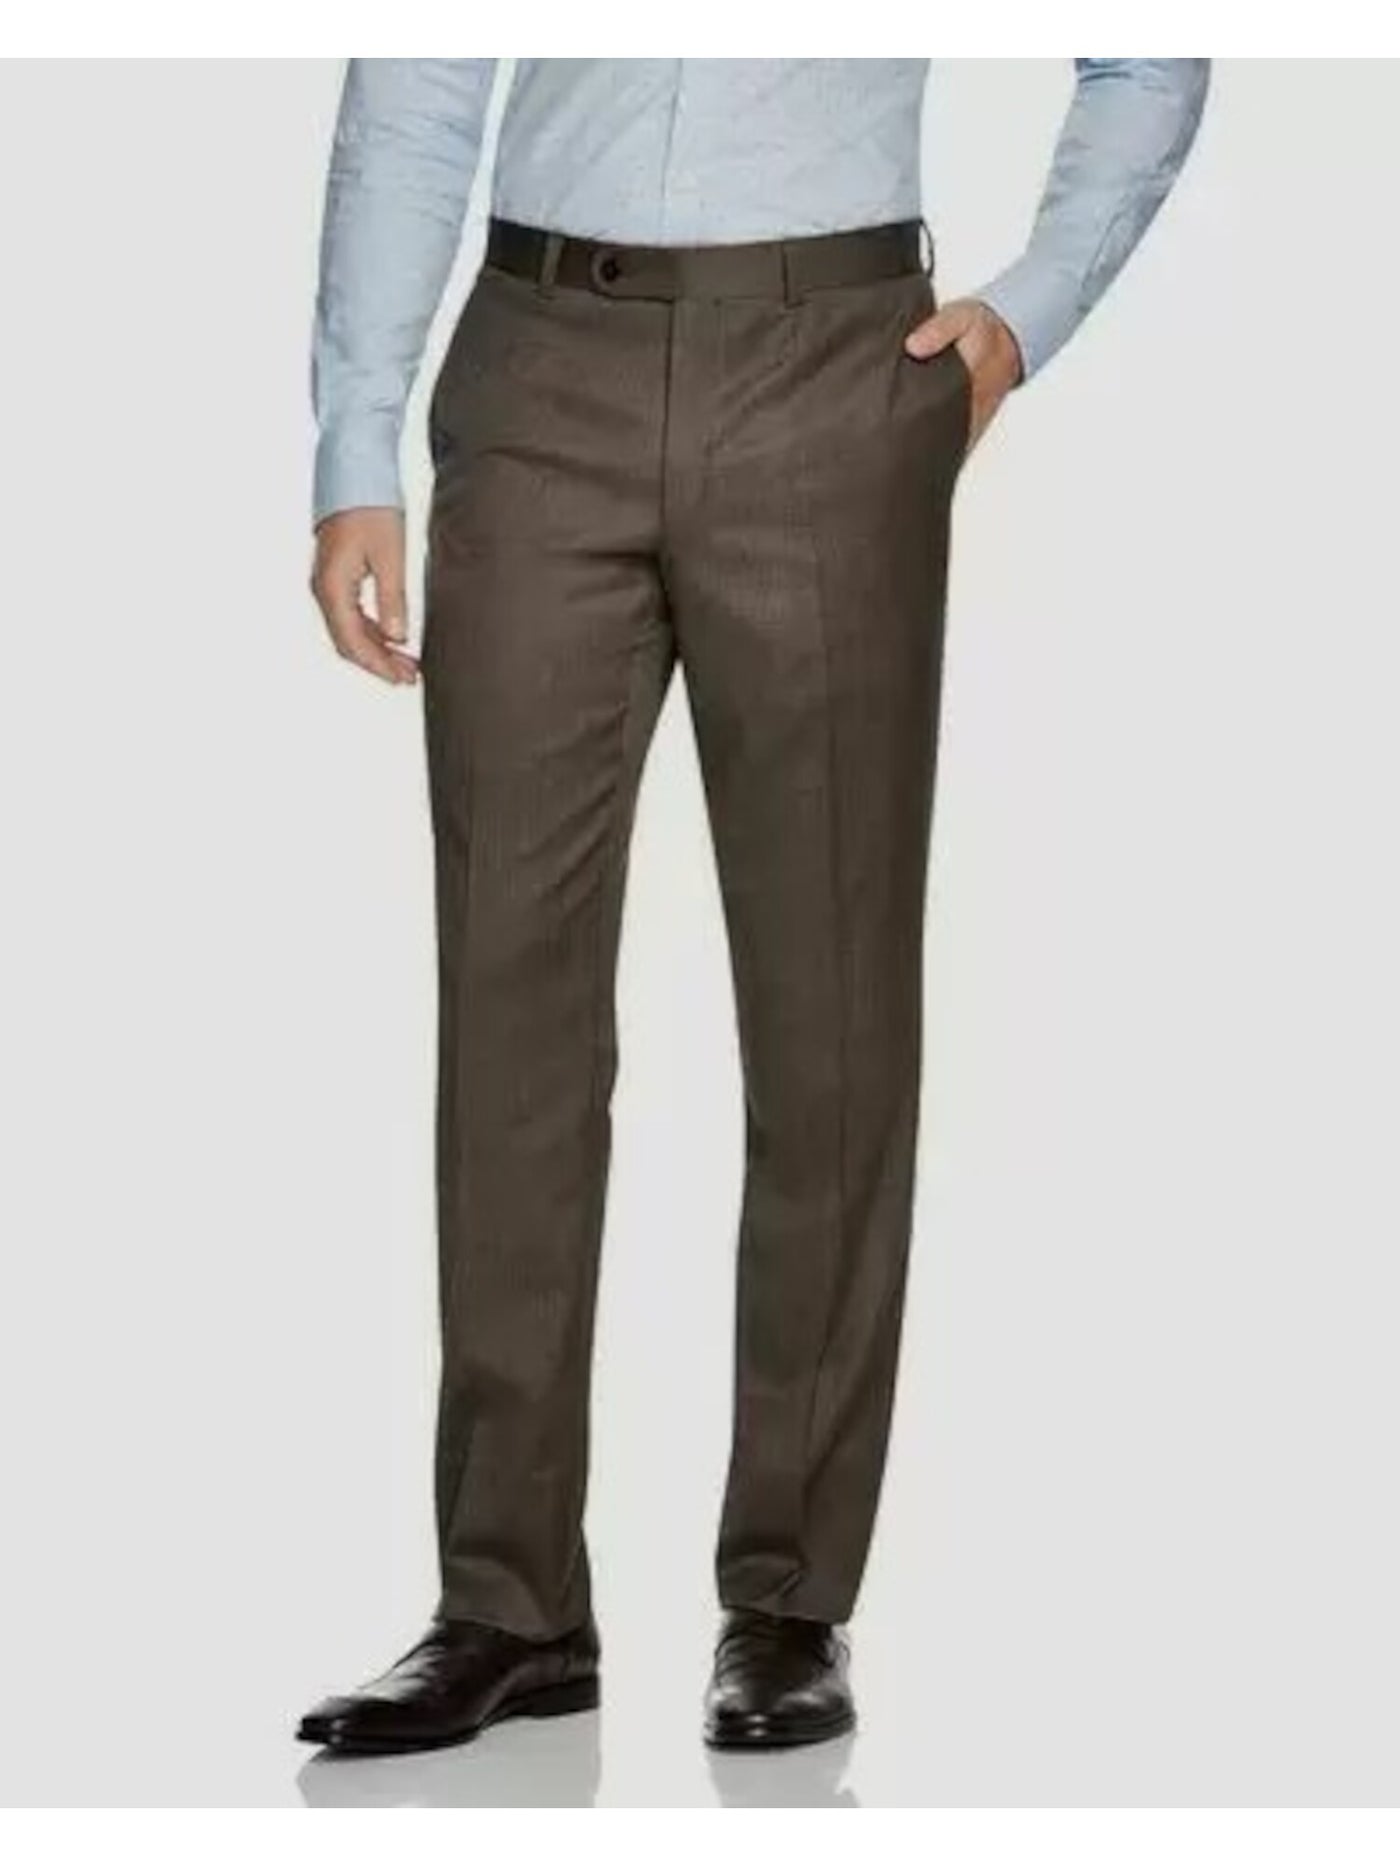 JACK VICTOR Mens Brown Tapered, Classic Fit Suit Separate Pants 34R